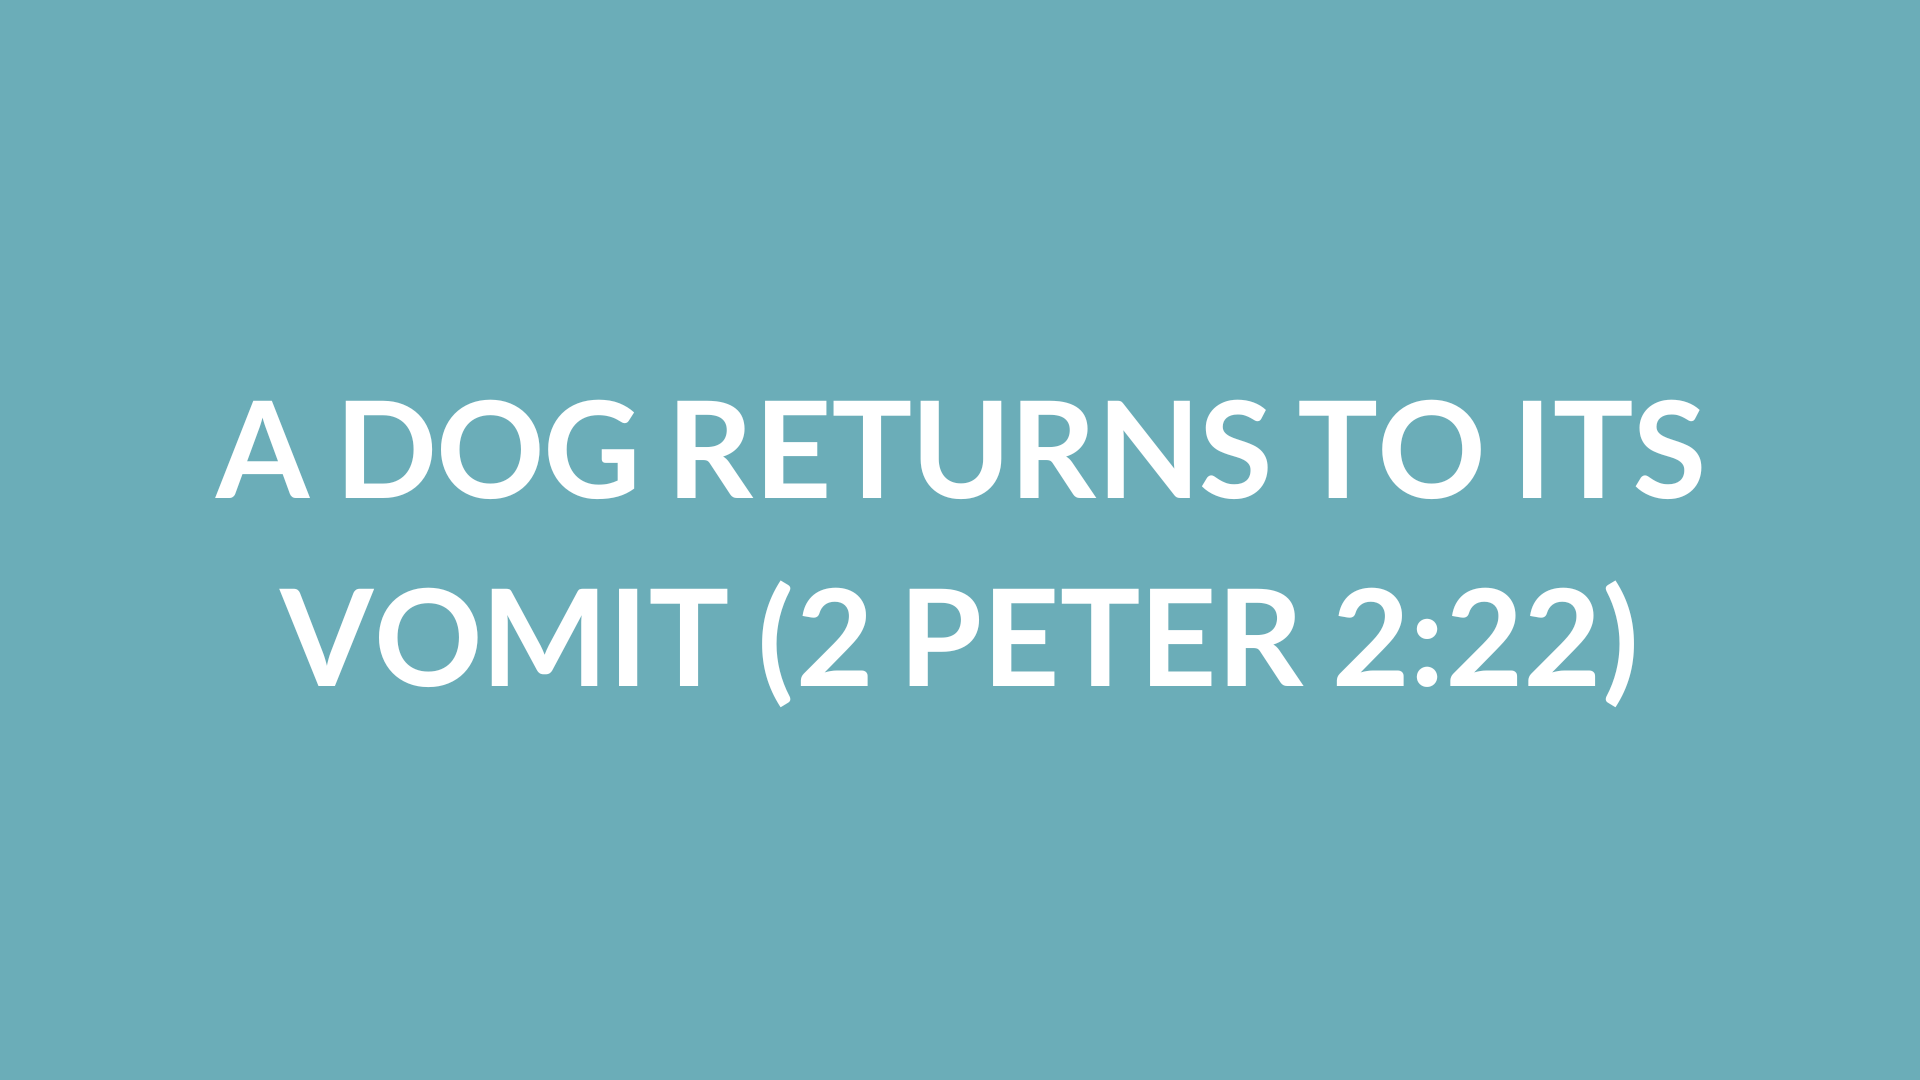 A Dog Returns To Its Vomit (2 Peter 2:22)